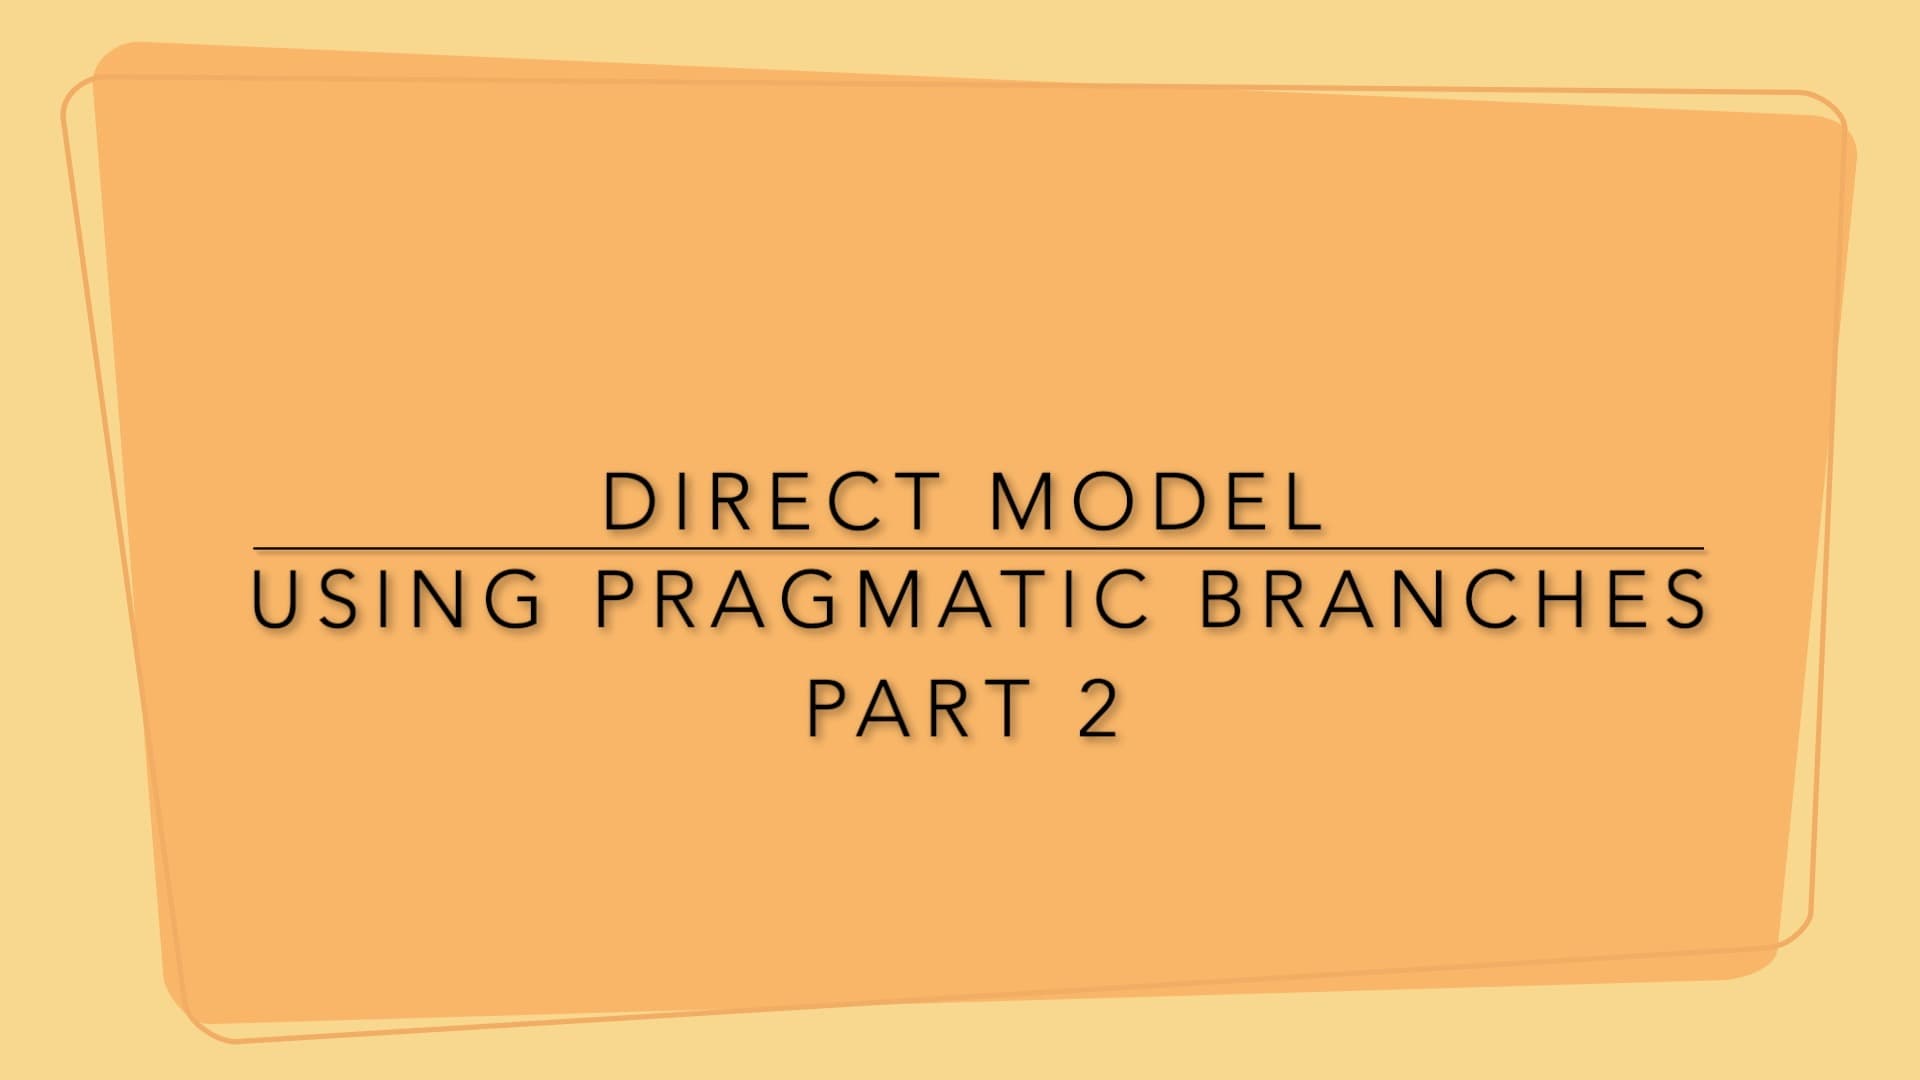 A Step-by-Step Guide to Doing a Direct Model of Pragmatic Branches within a PODD book Part 2